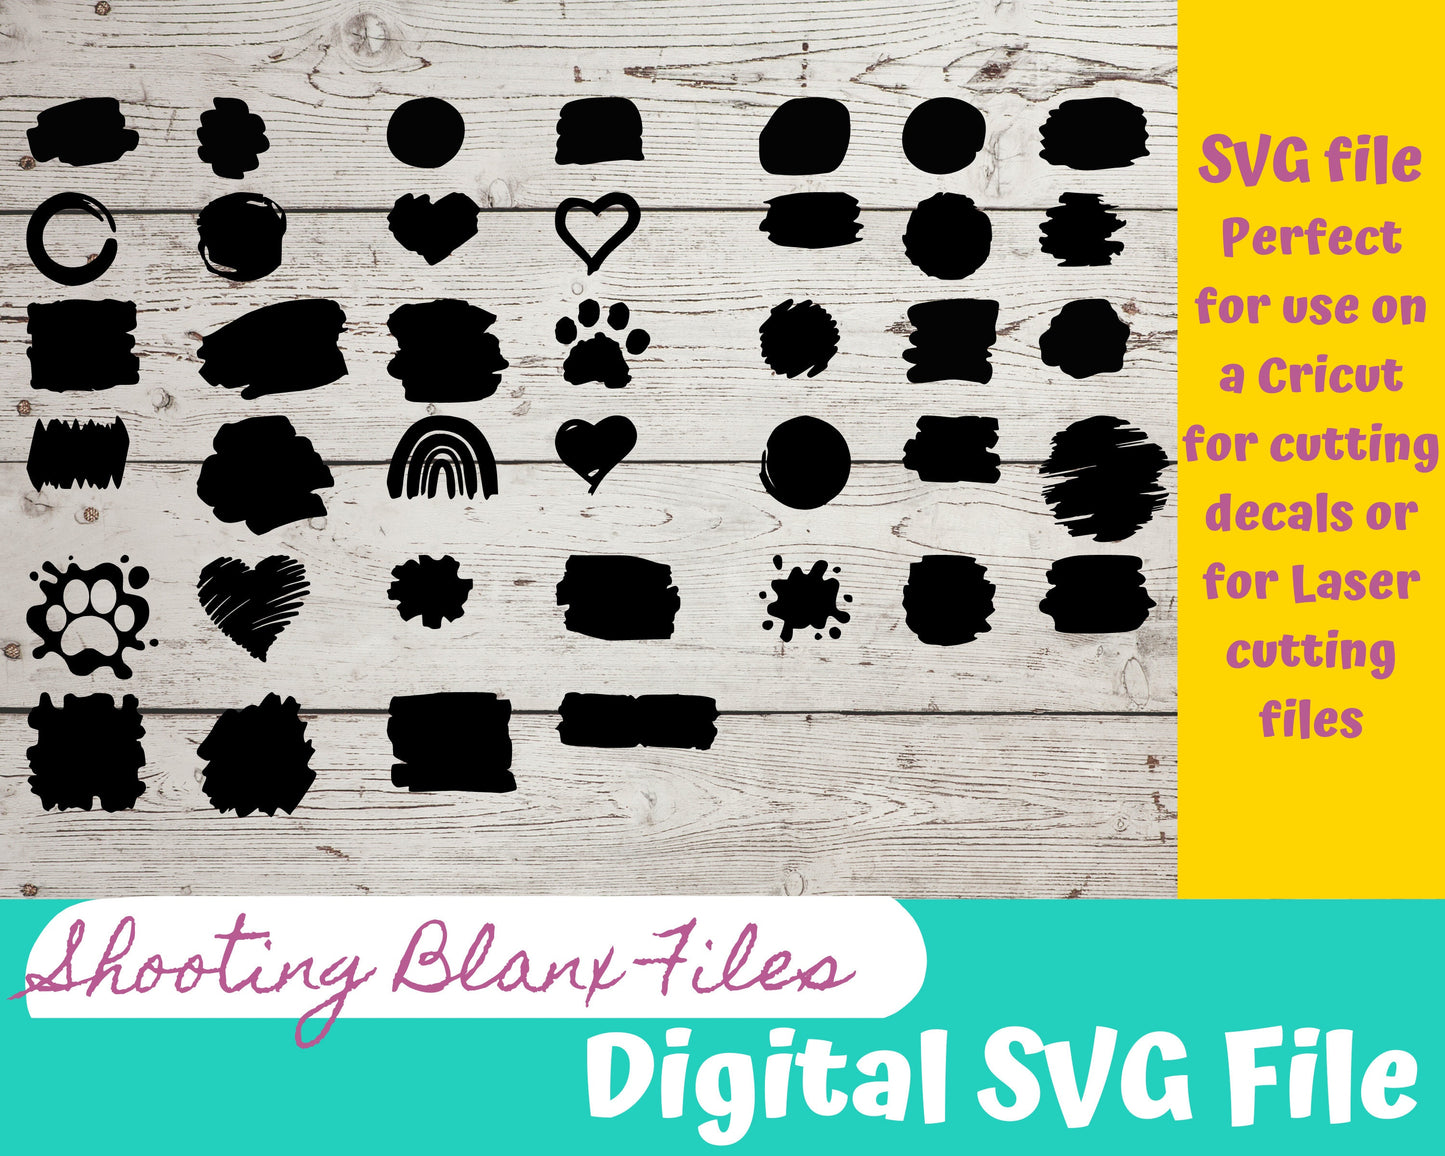 Brush Stroke bundle SVG files perfect for Cricut, Cameo, or Silhouette also for laser engraving Glowforge, Keychain,